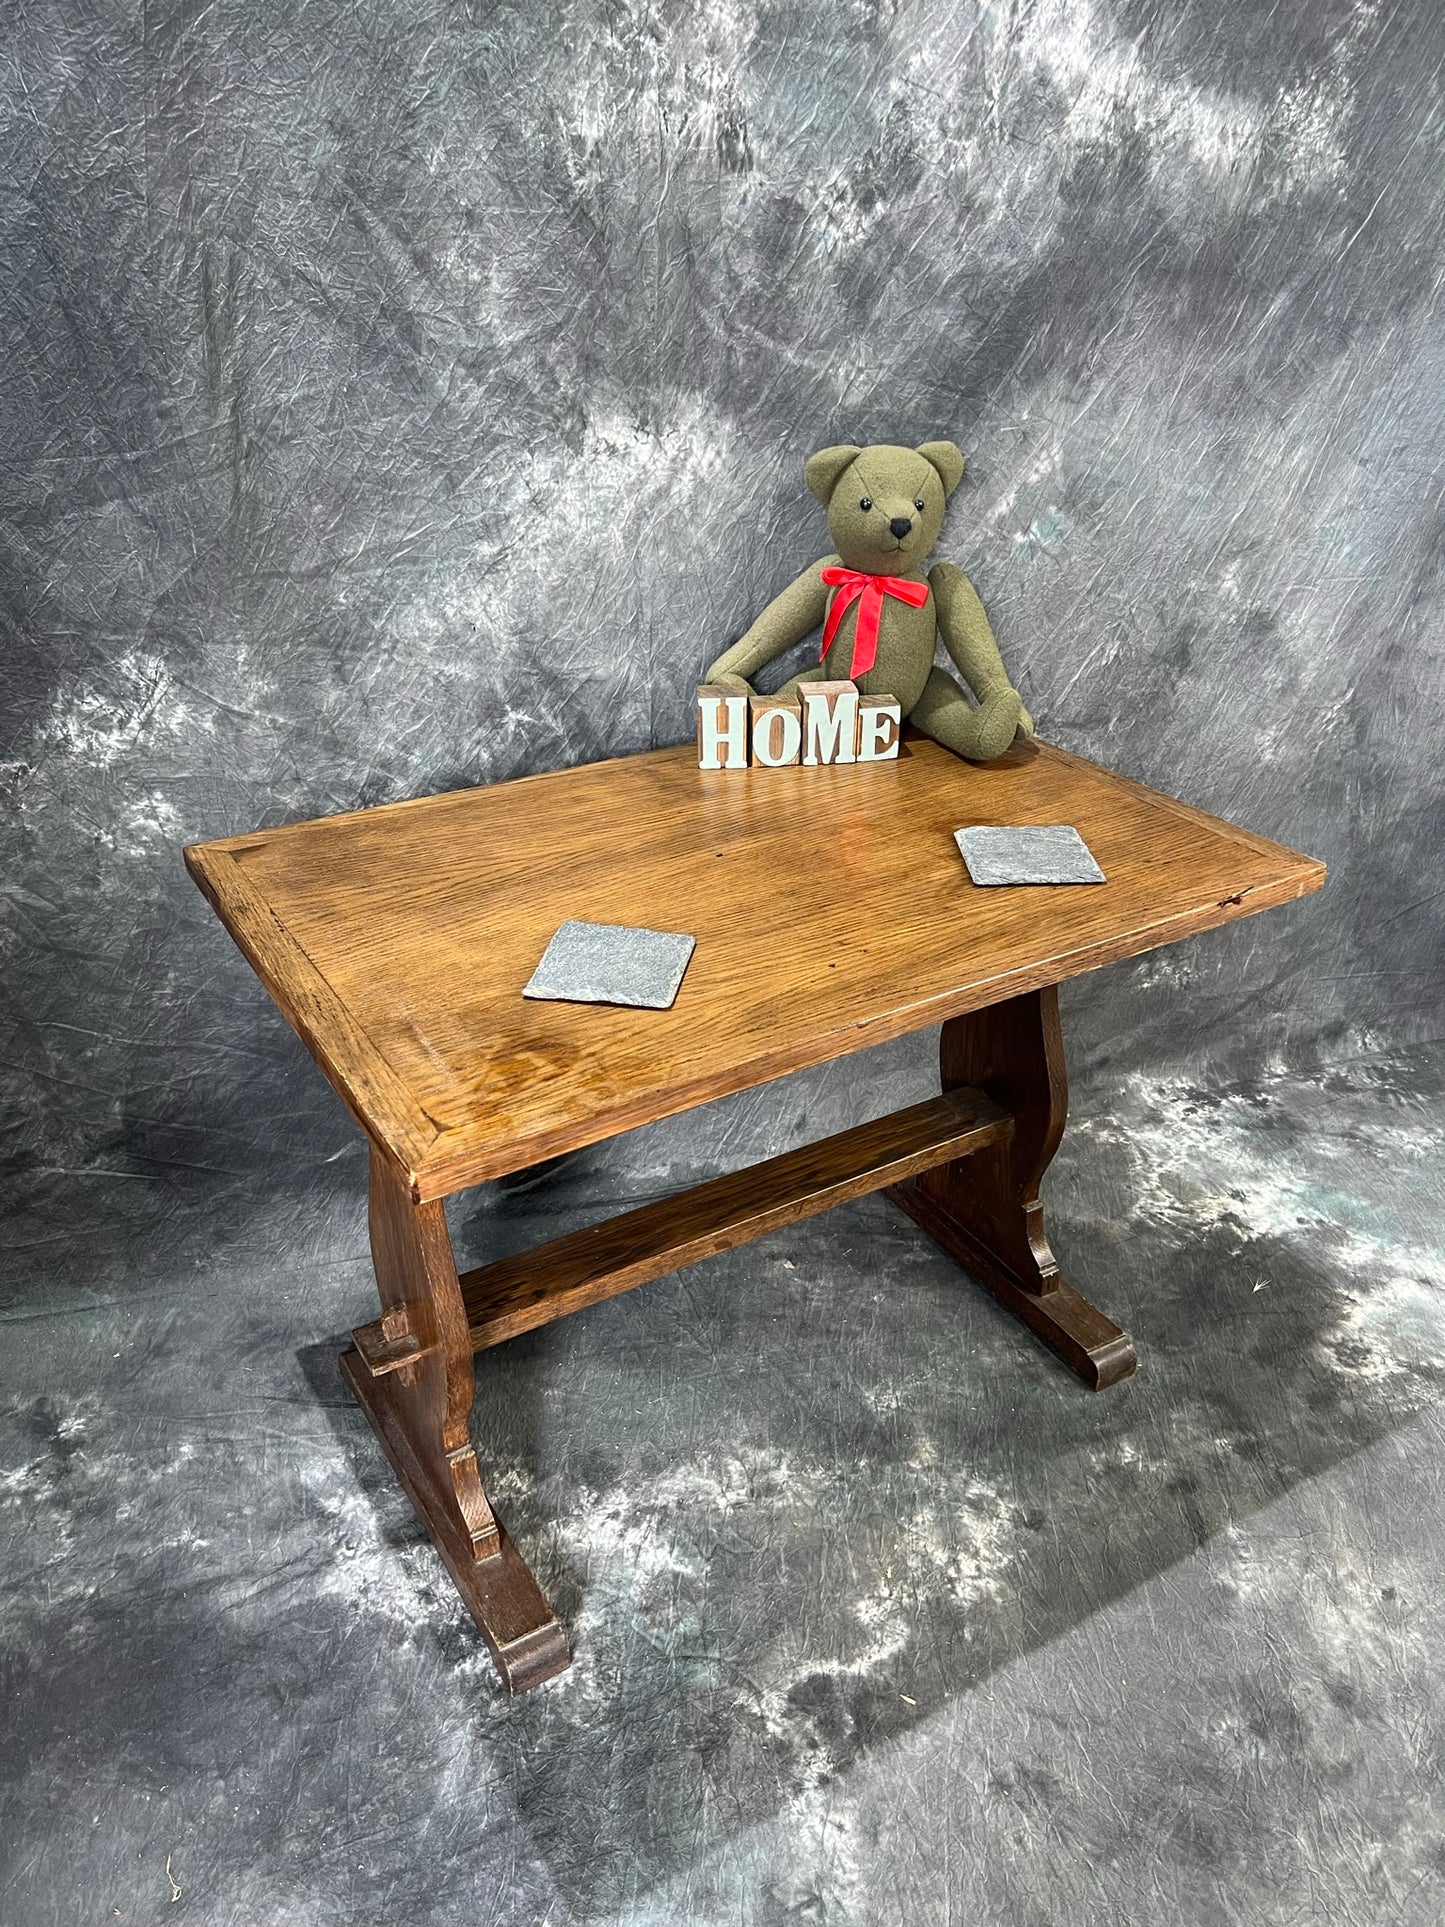 Vintage Oak Refectory Coffee Table Rustic Farmhouse Antique Country Home Side Table